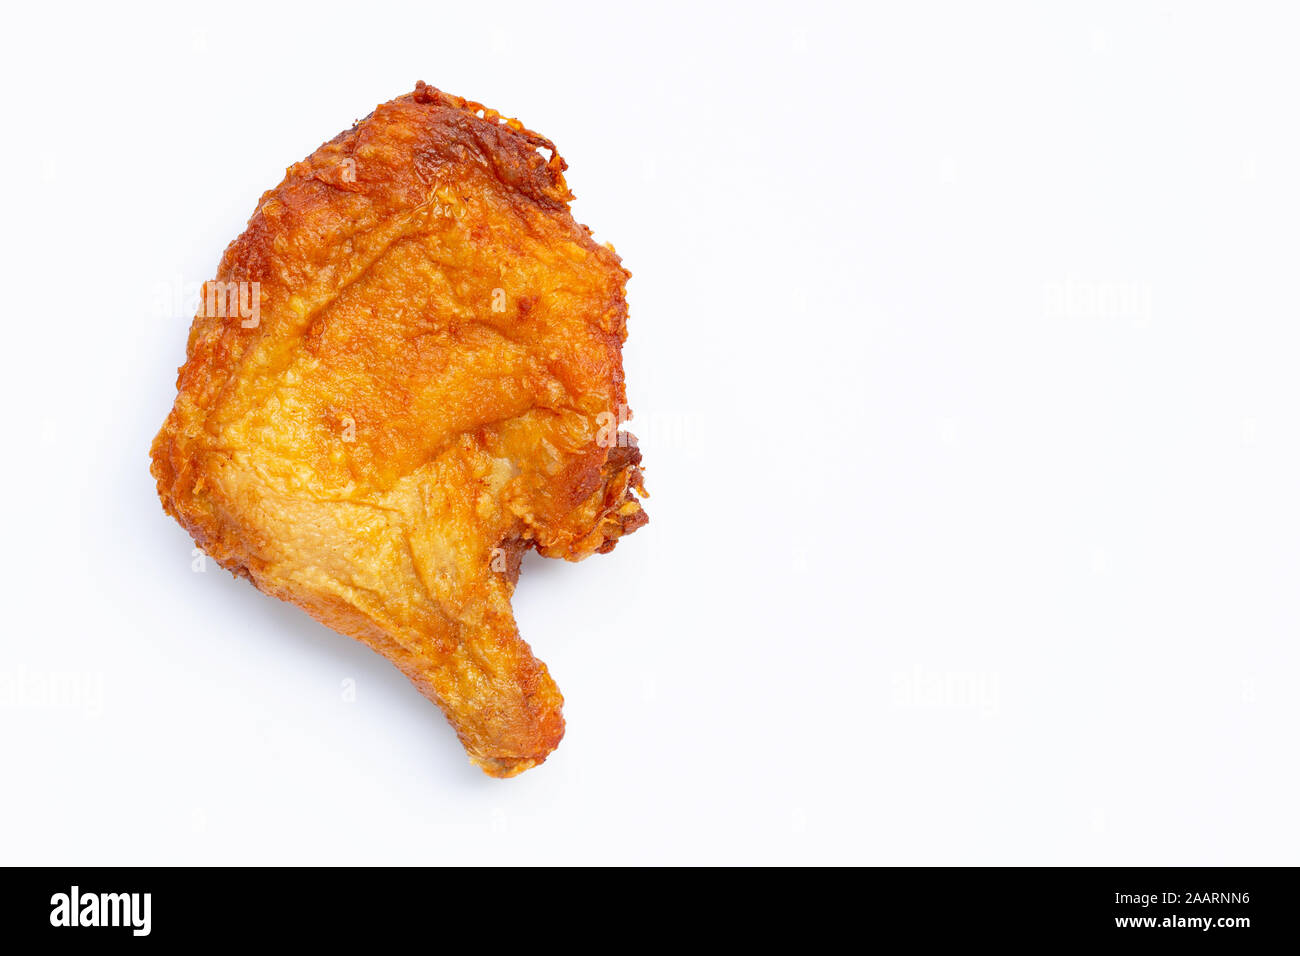 Fried chicken on white background. Copy space Stock Photo